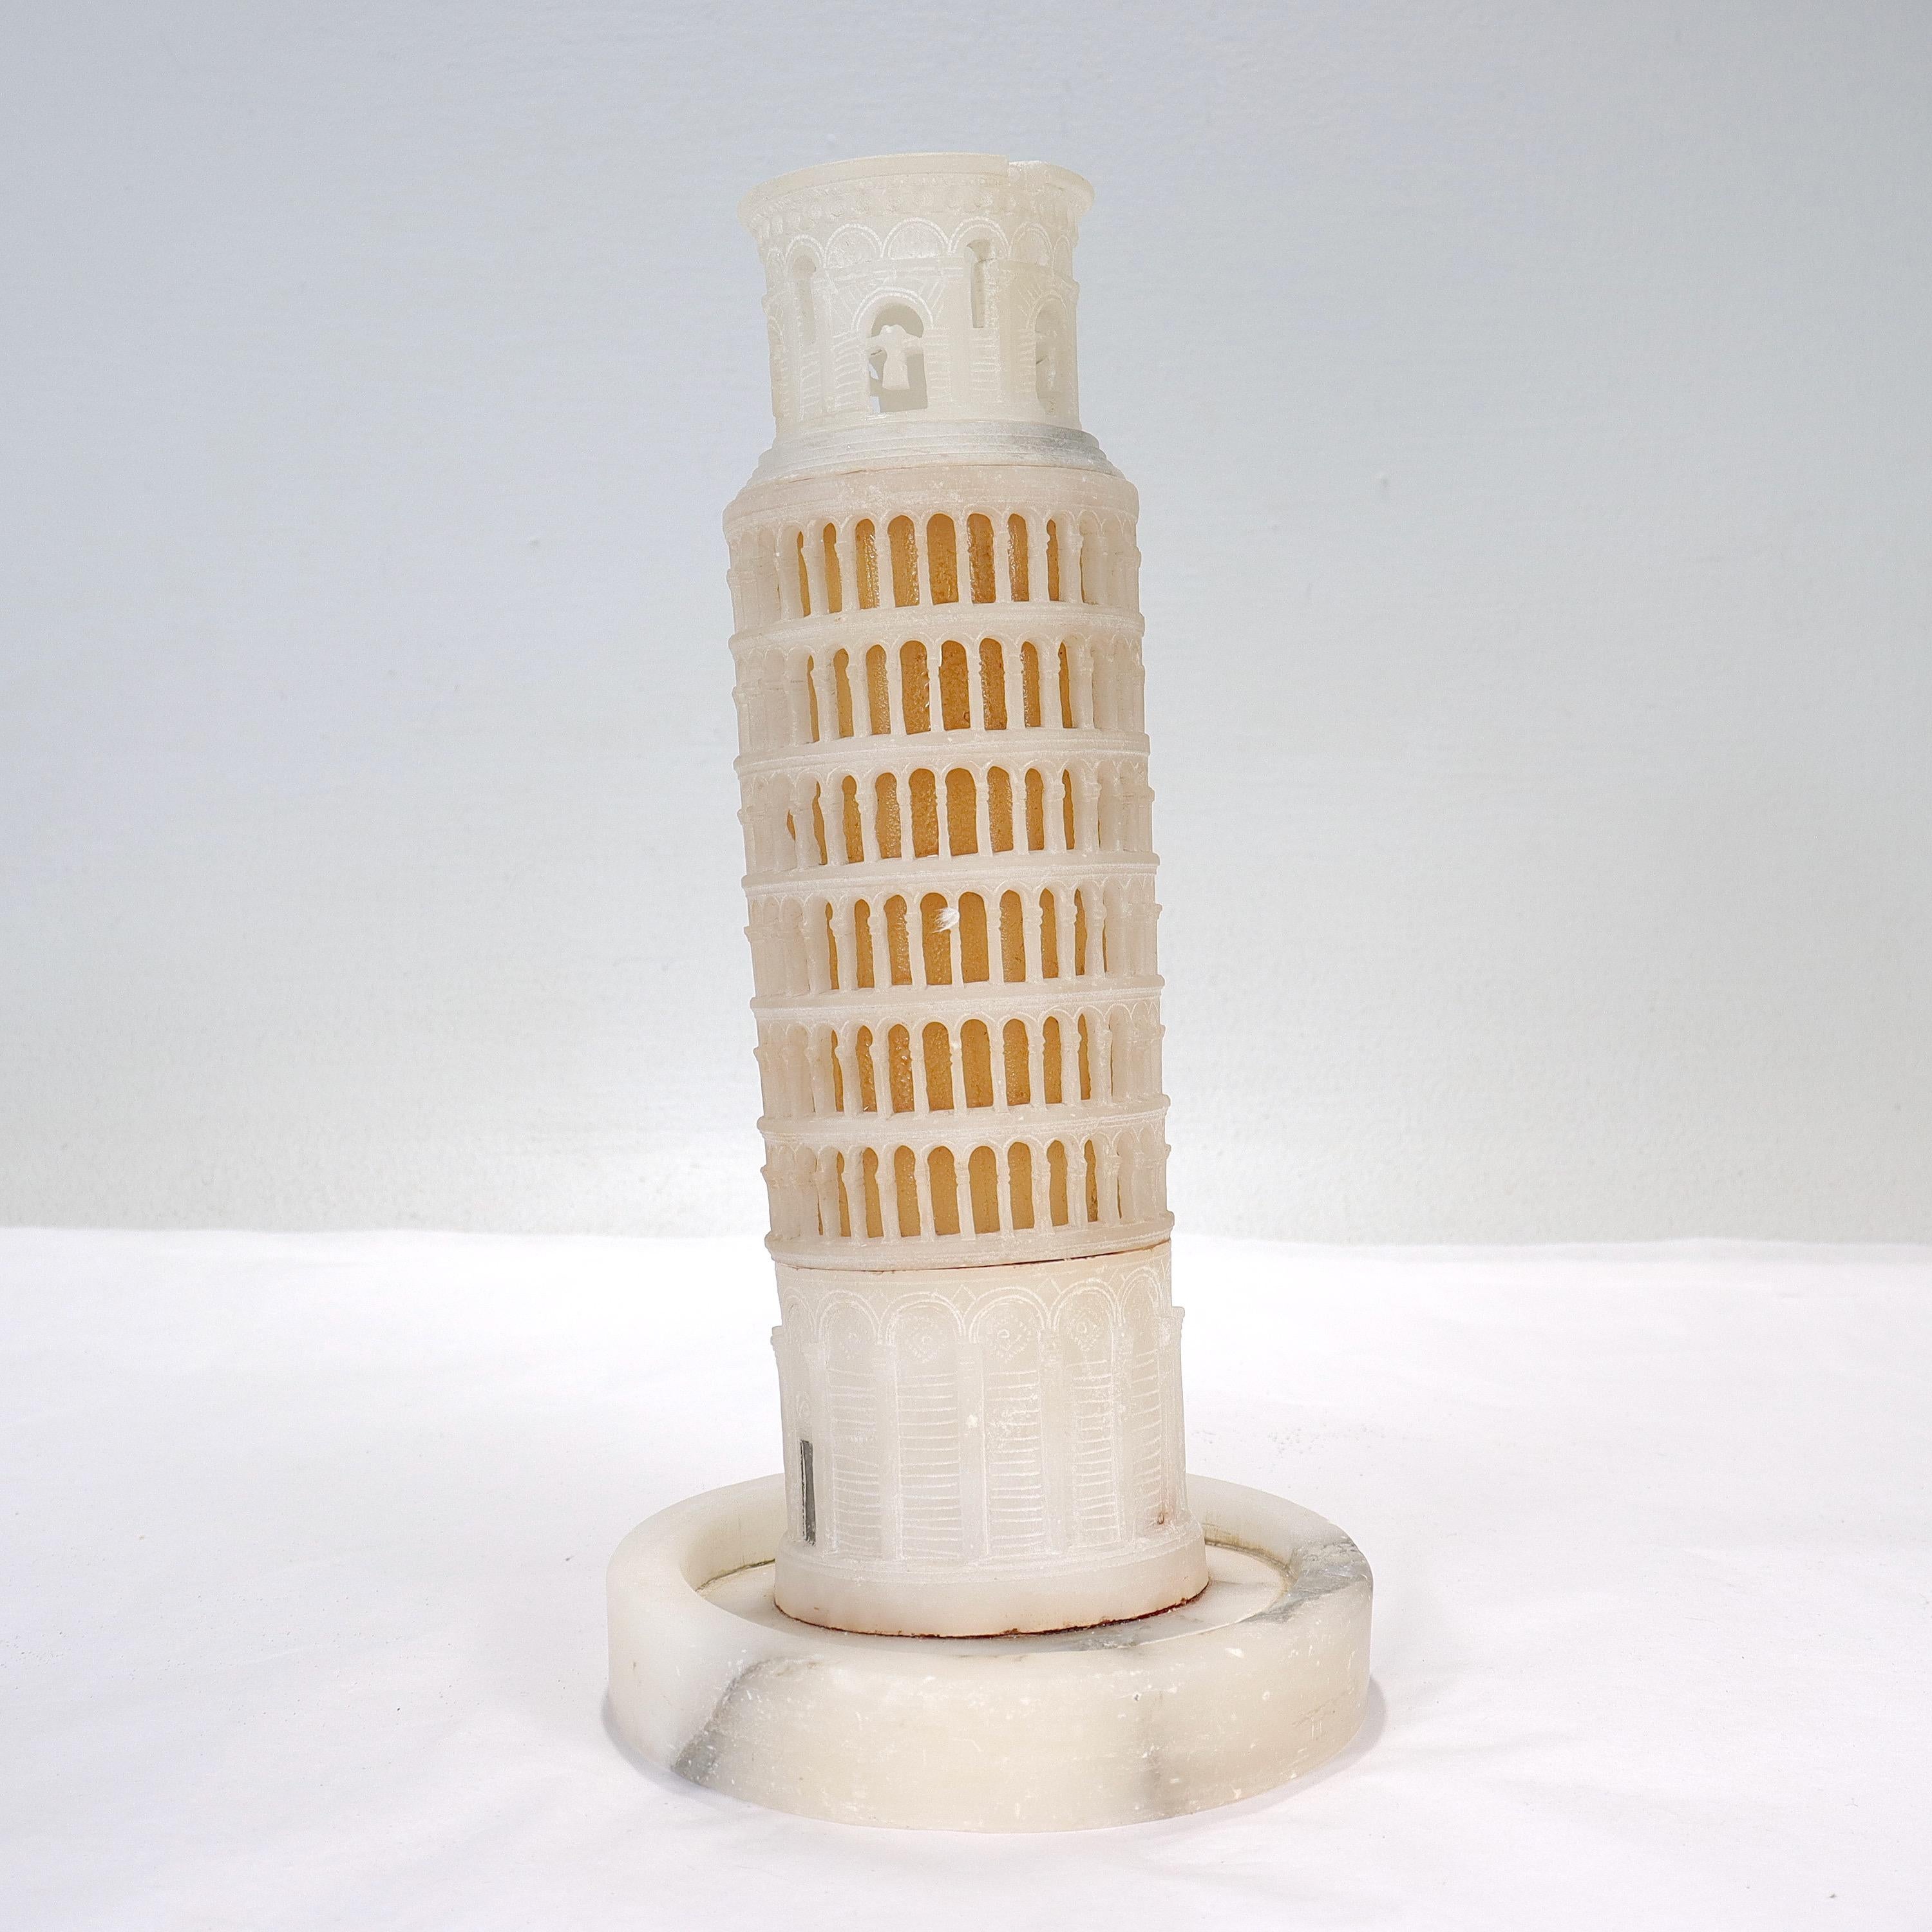 Unknown Old or Antique Grand Tour Style Alabaster Leaning Tower of Pisa Sculpture